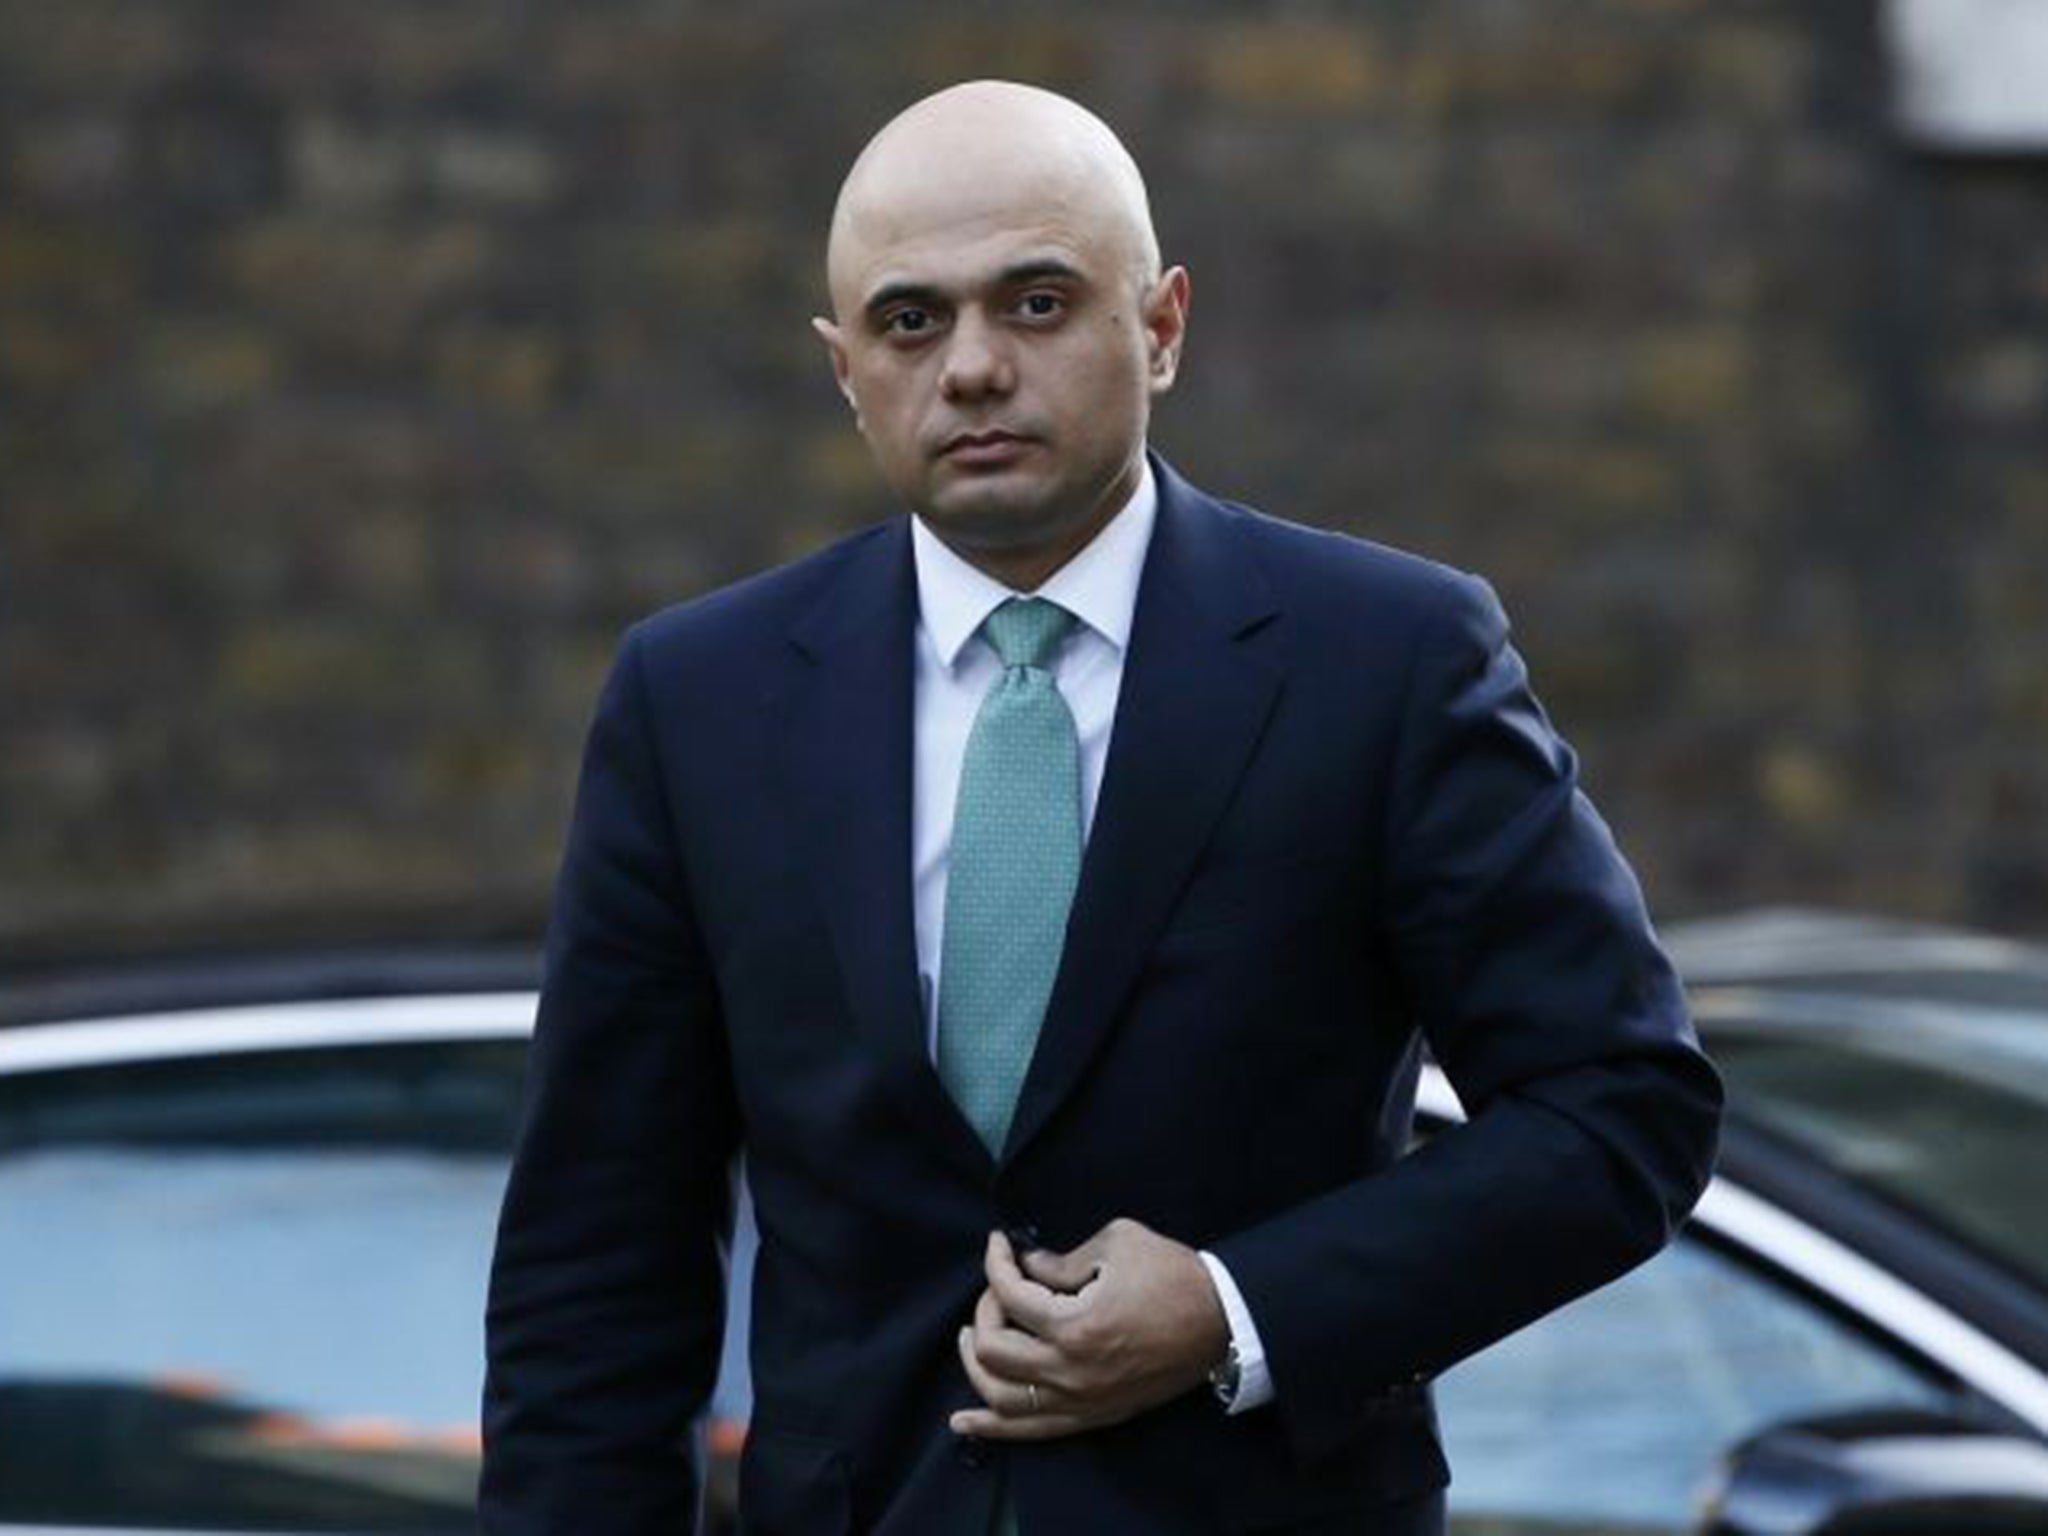 Sajid Javid, arrives to attend a cabinet meeting at Number 10 Downing Street